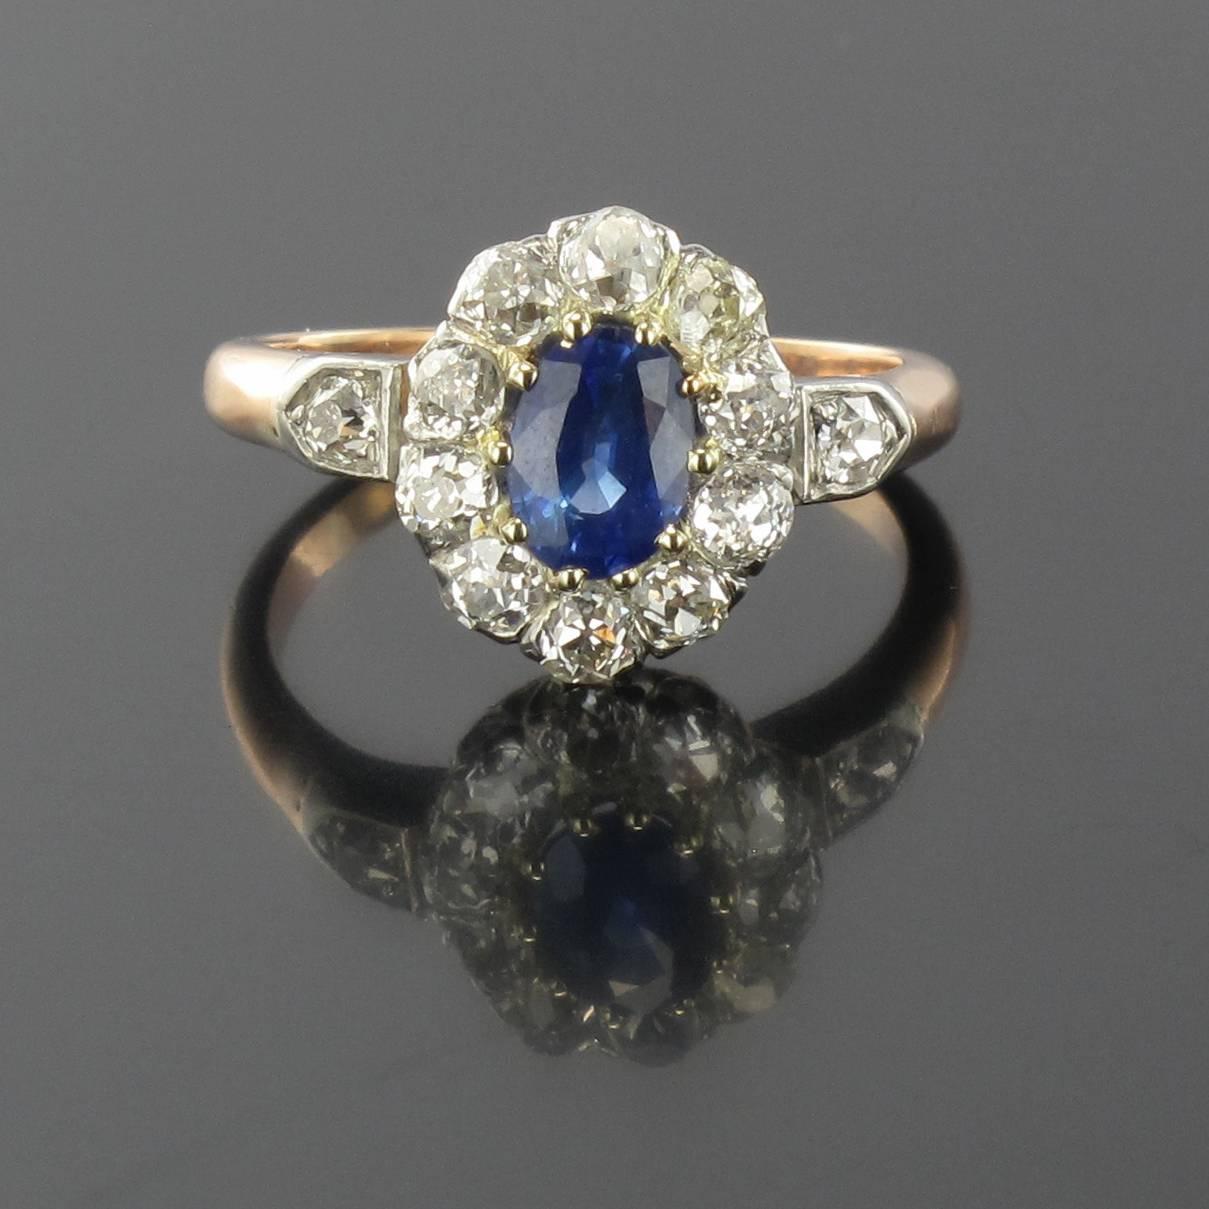 Ring in 18 carat rose gold, eagle head hallmark. 

This splendid antique ring features a claw set oval sapphire with an antique brilliant cut diamond halo. 

Sapphire weight: 1.32 carat approximately
Total diamond weight: about 0.80